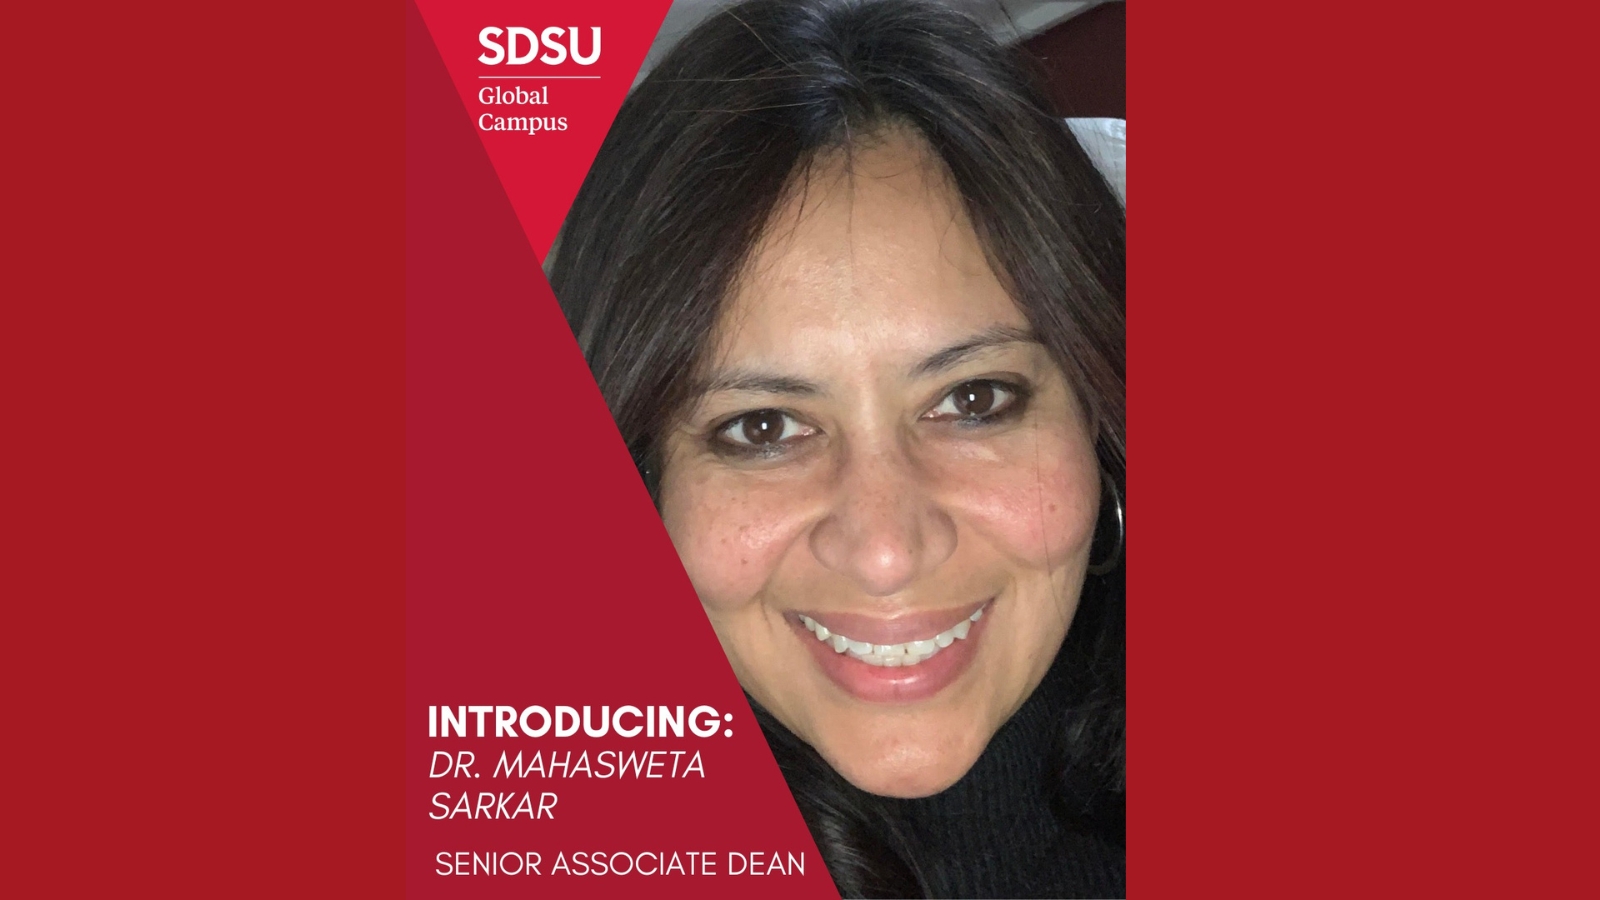 Electrical and Computer Engineering Professor Announced as New Senior Associate Dean of SDSU Global Campus